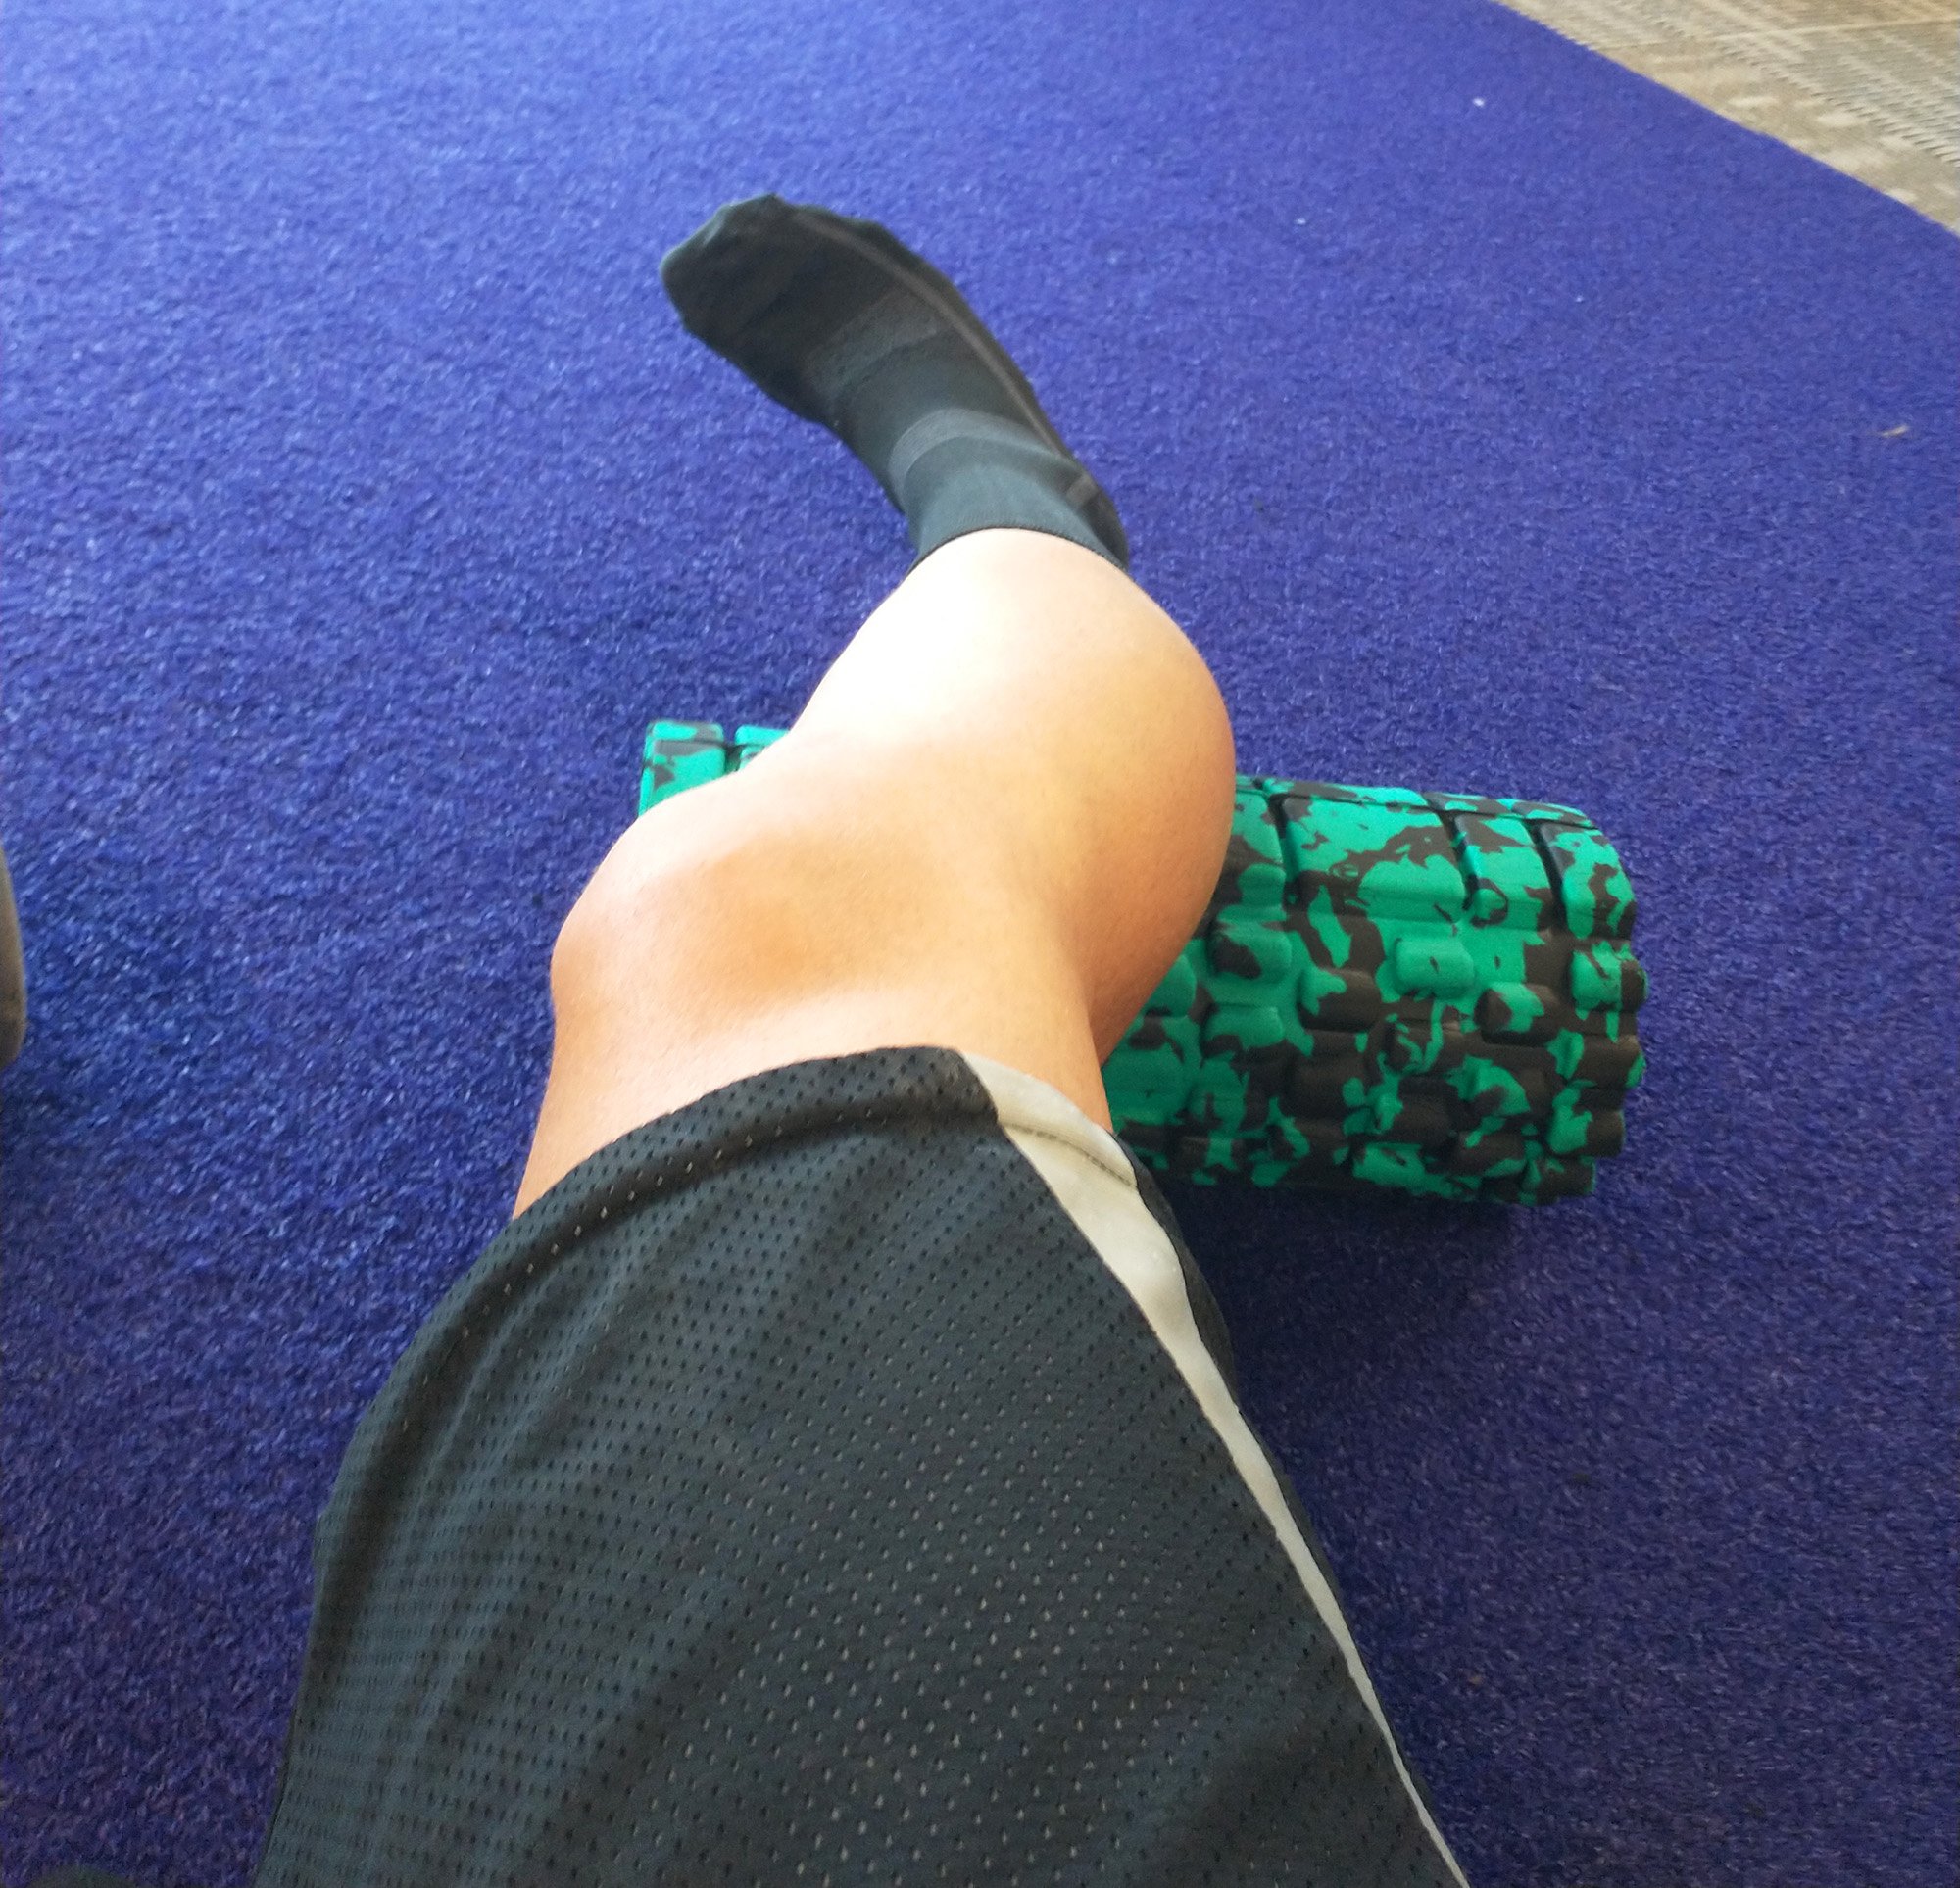 Perk of being back in Anytime Fitness land is I get to foam roll if I'm not too lazy. Legs really getting tight.